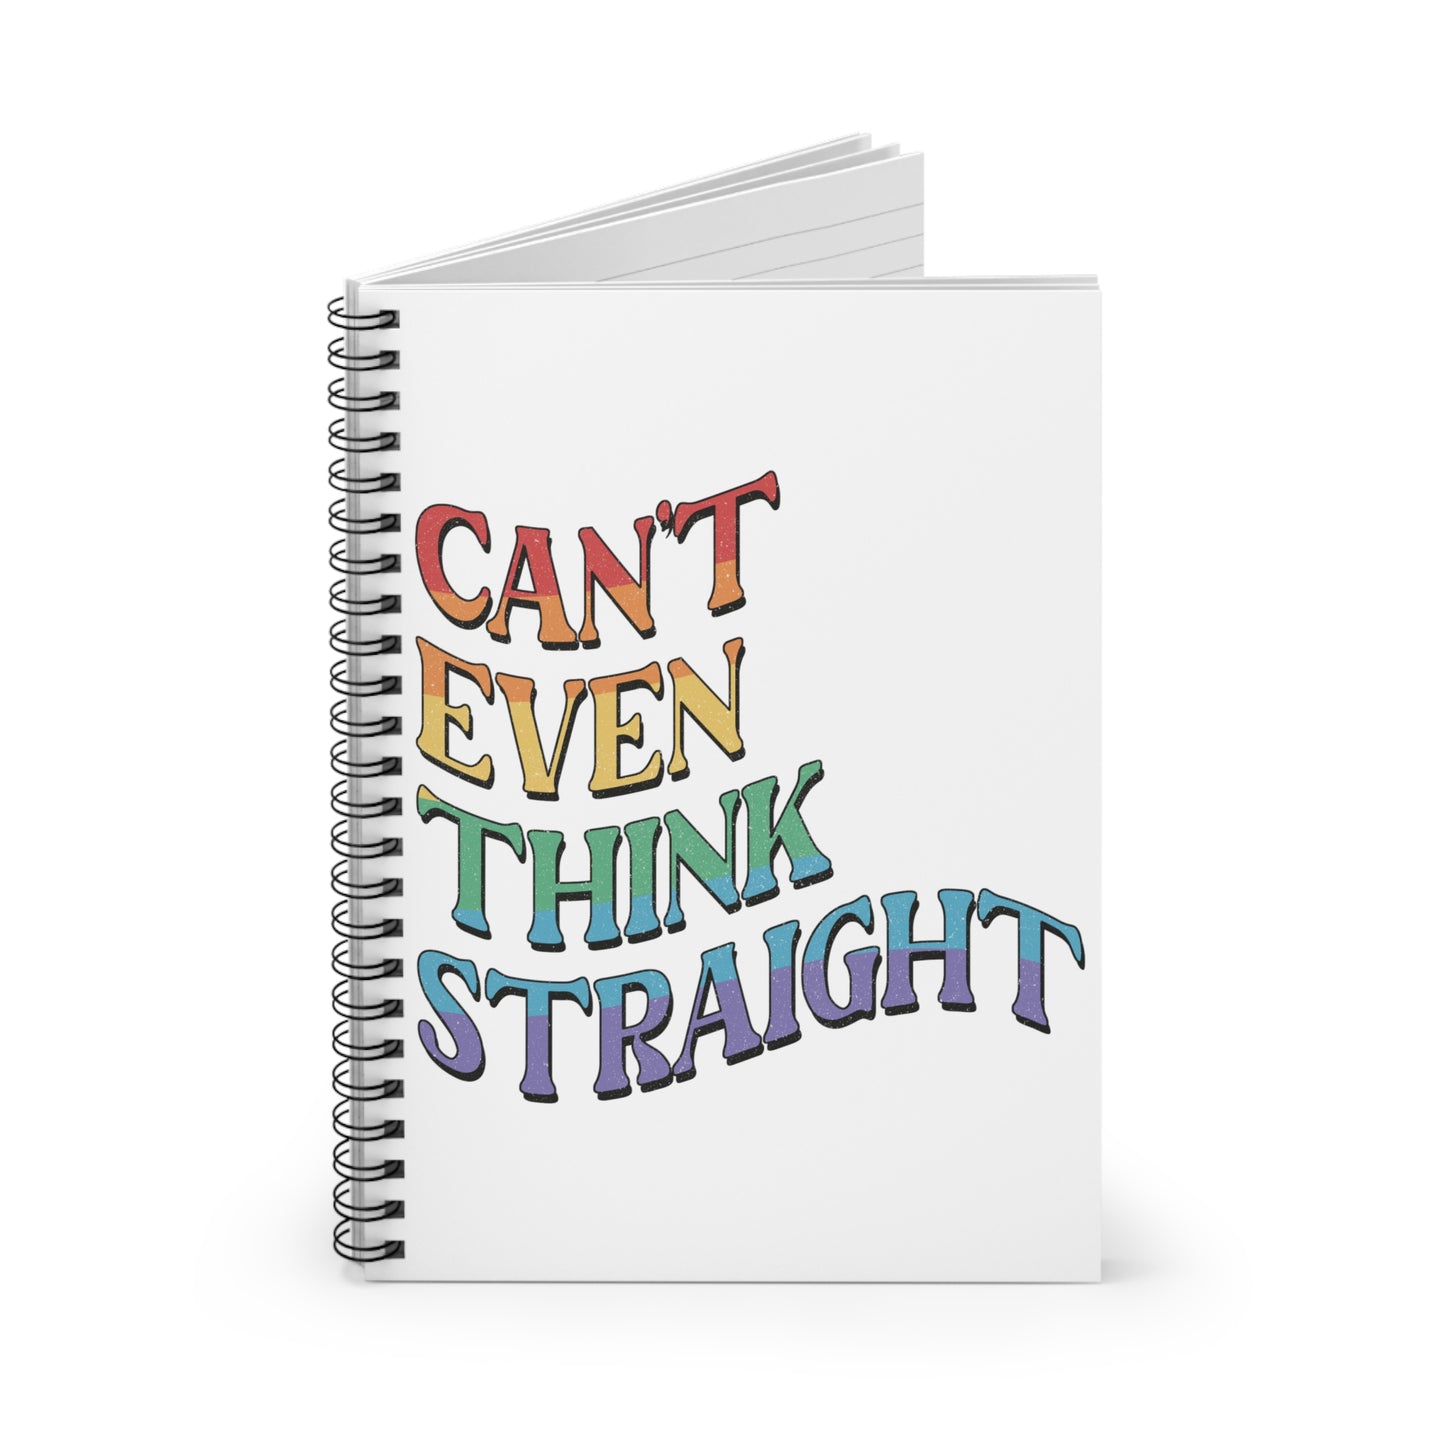 Can't Even Think Straight: Spiral Notebook - Log Books - Journals - Diaries - and More Custom Printed by TheGlassyLass